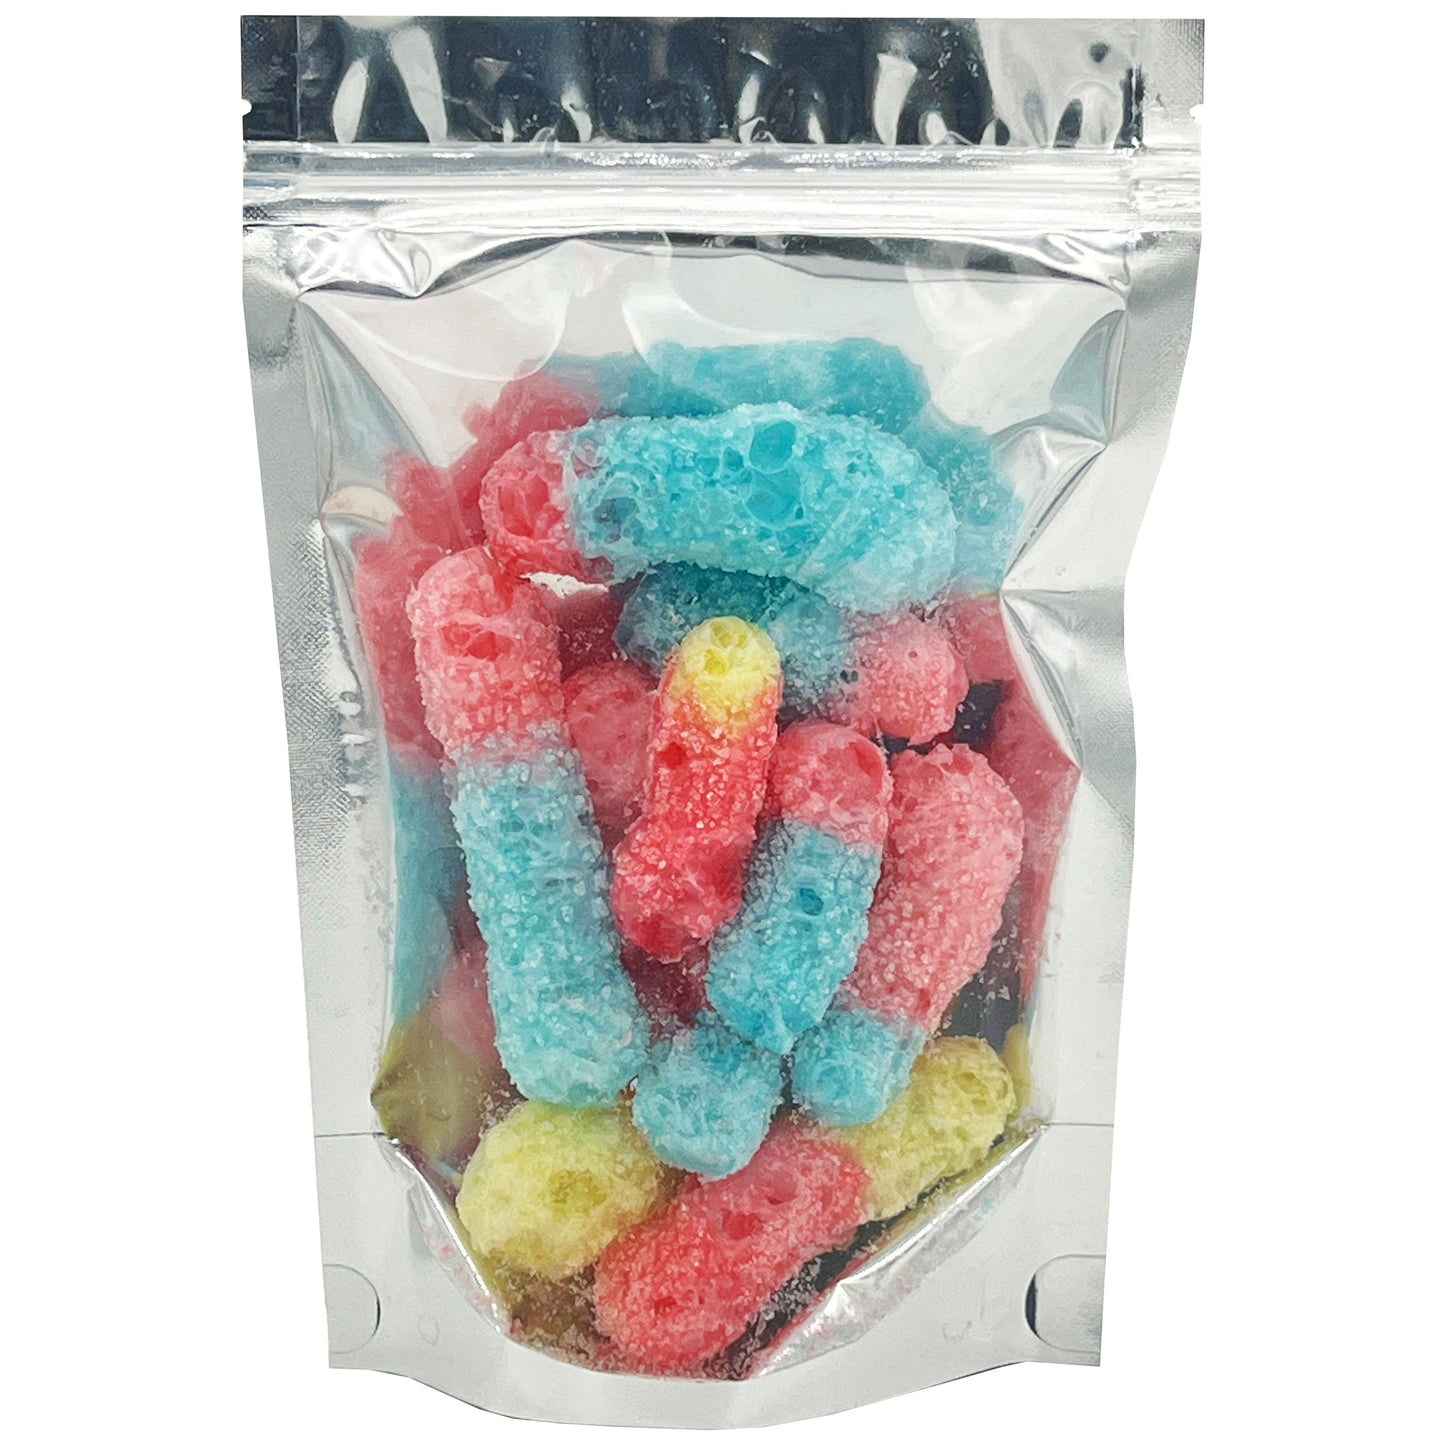 Freeze Dried Candy Sour Gummy Worms Variety Pack – Crunchy Candy Snack – Space Theme Party Favor Gift Idea